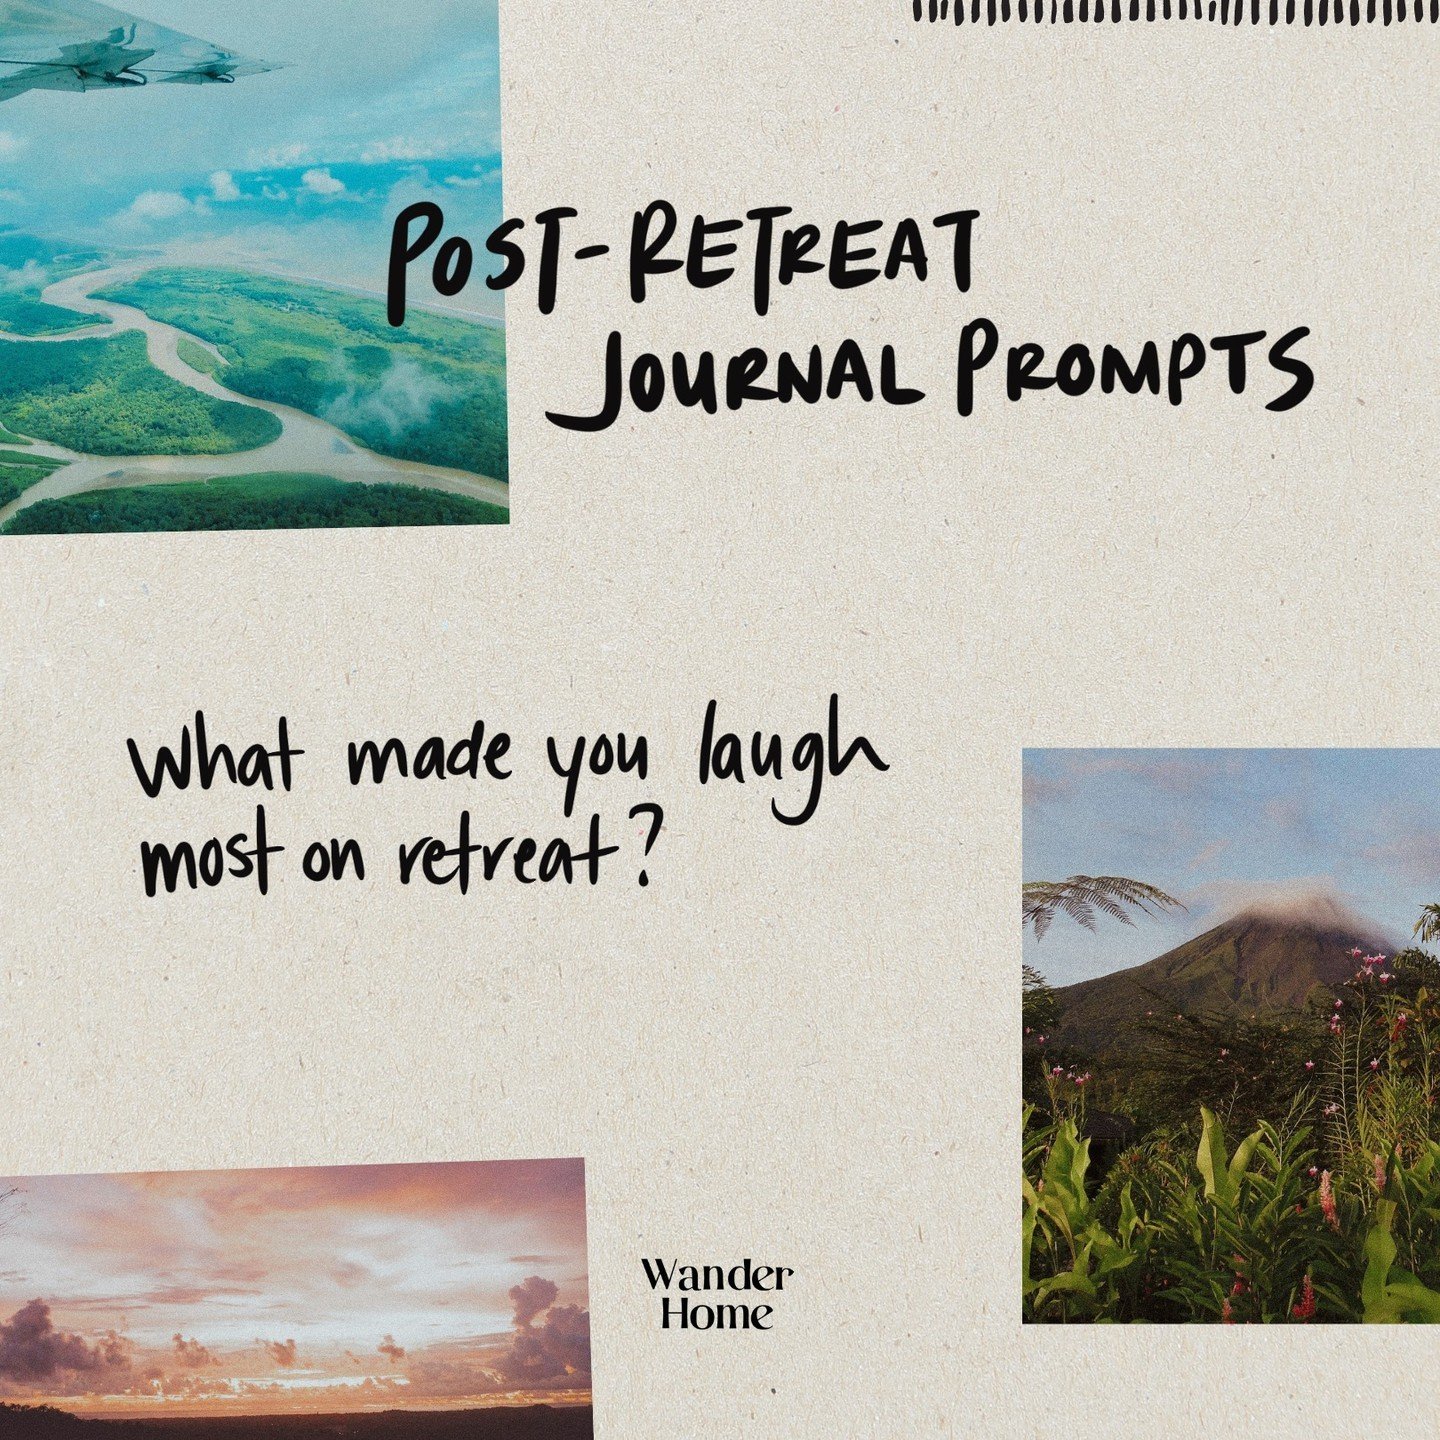 Have you been on a Wander Home retreat recently? Sometimes it&rsquo;s hard to transition back into your day-to-day routine while holding onto the magic you captured on retreat. Here are a few journal prompts you can use to reflect on your time away a